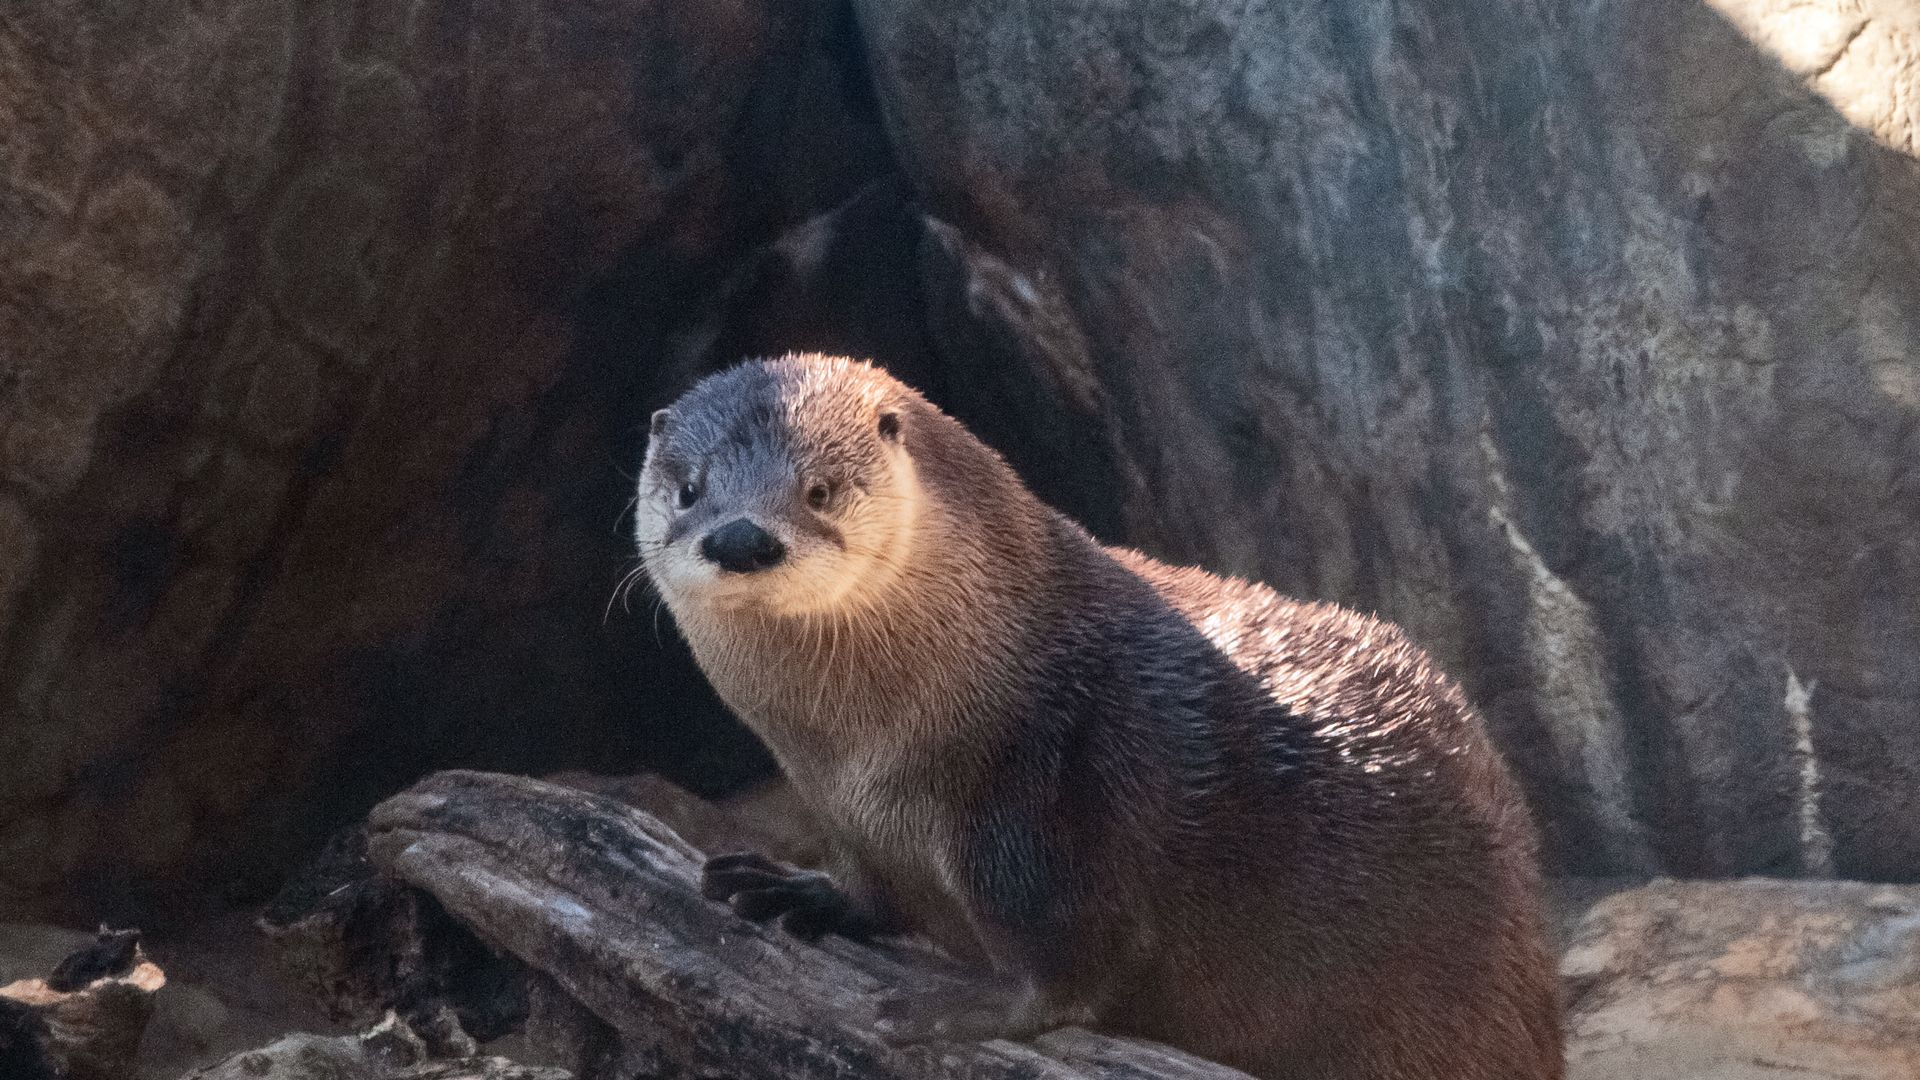 A very cute looking otter, which like a big fat brown rat, but with a cute face 